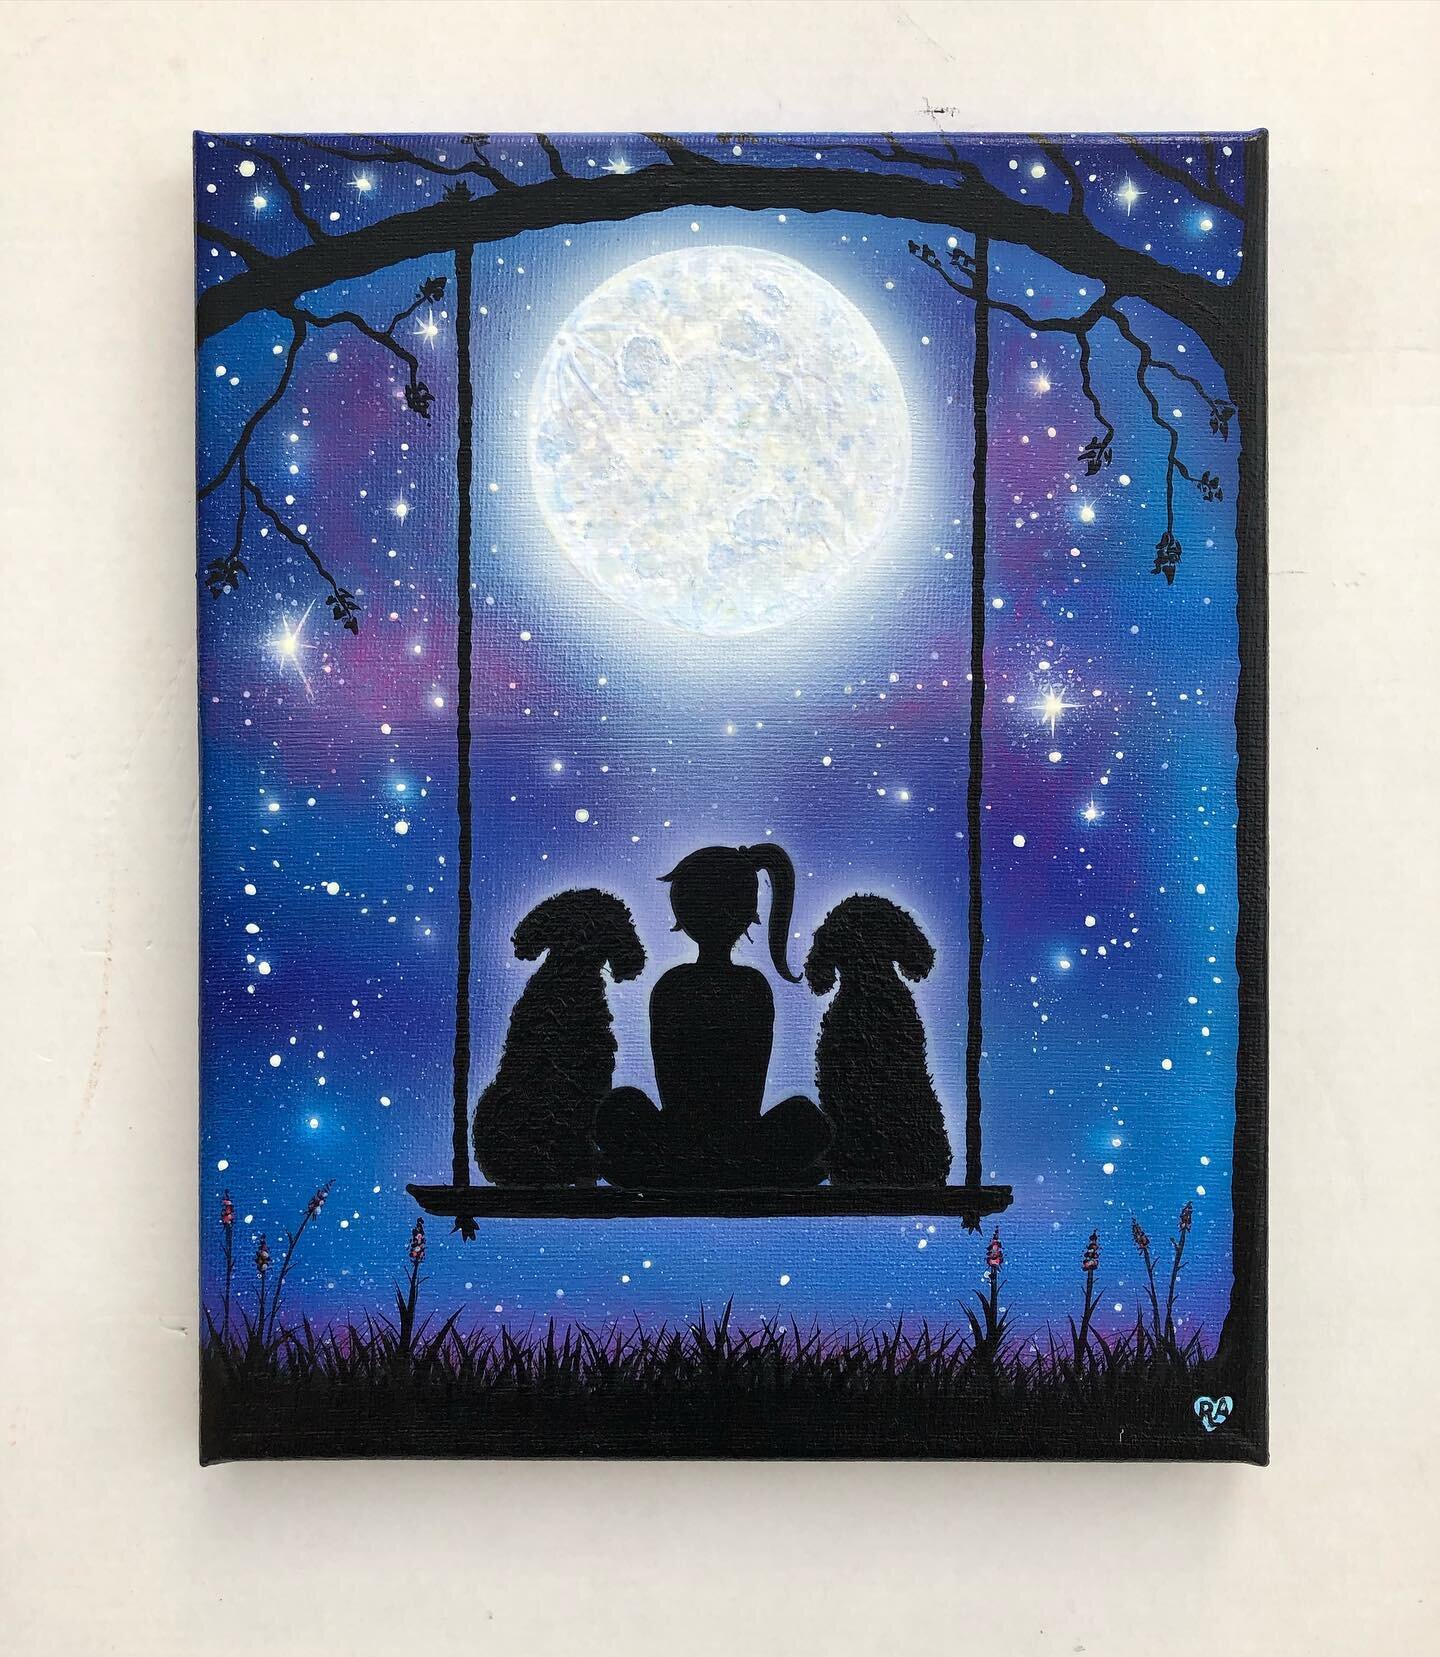 ✨🐩🎨 &ldquo;A Girl and her Doodles&rdquo; Custom GLOW-in-the-dark Canvas Painting by me @makeartshine ✨🖌

🎨✨ MakeArtShine.com 🎨✨ 

#labradoodle #goldendoodle #doodles #agirlandherdog #custom #canvas #painting #acrylicpainting #custompainting #mak